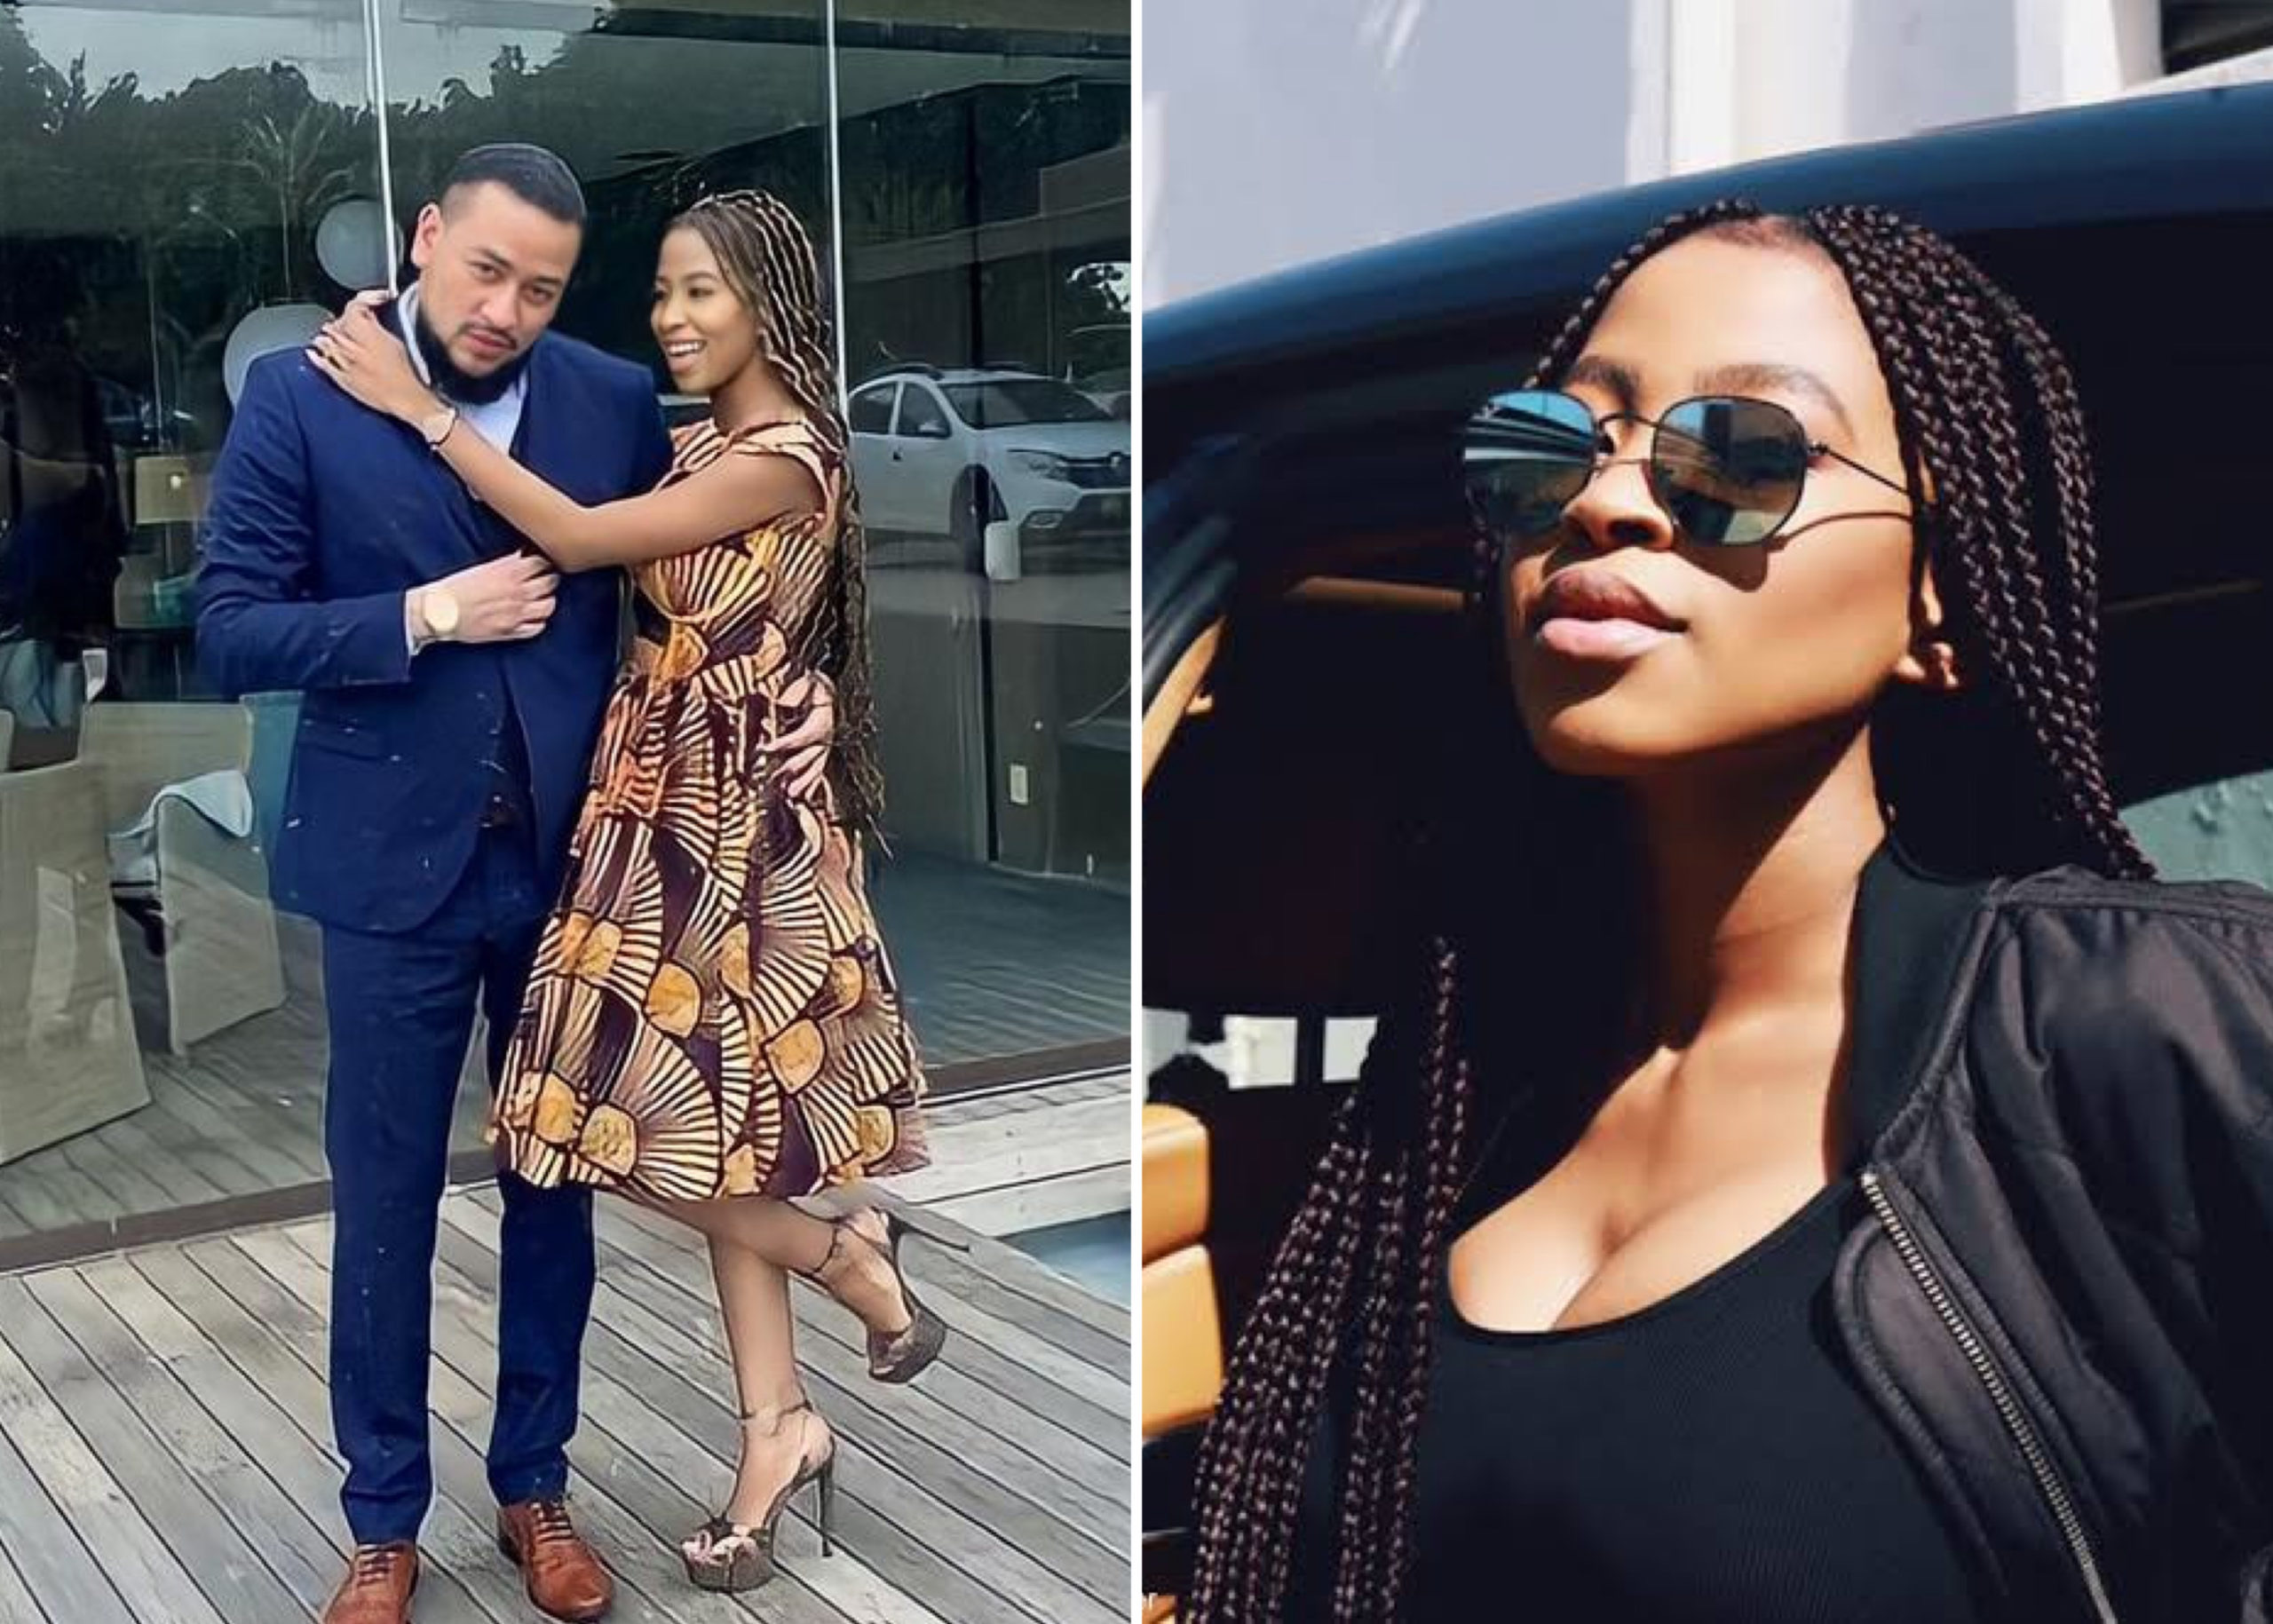 She Didn’t Die By Suicide - Father Of AKA's Fiancée Says As She Is Laid To Rest